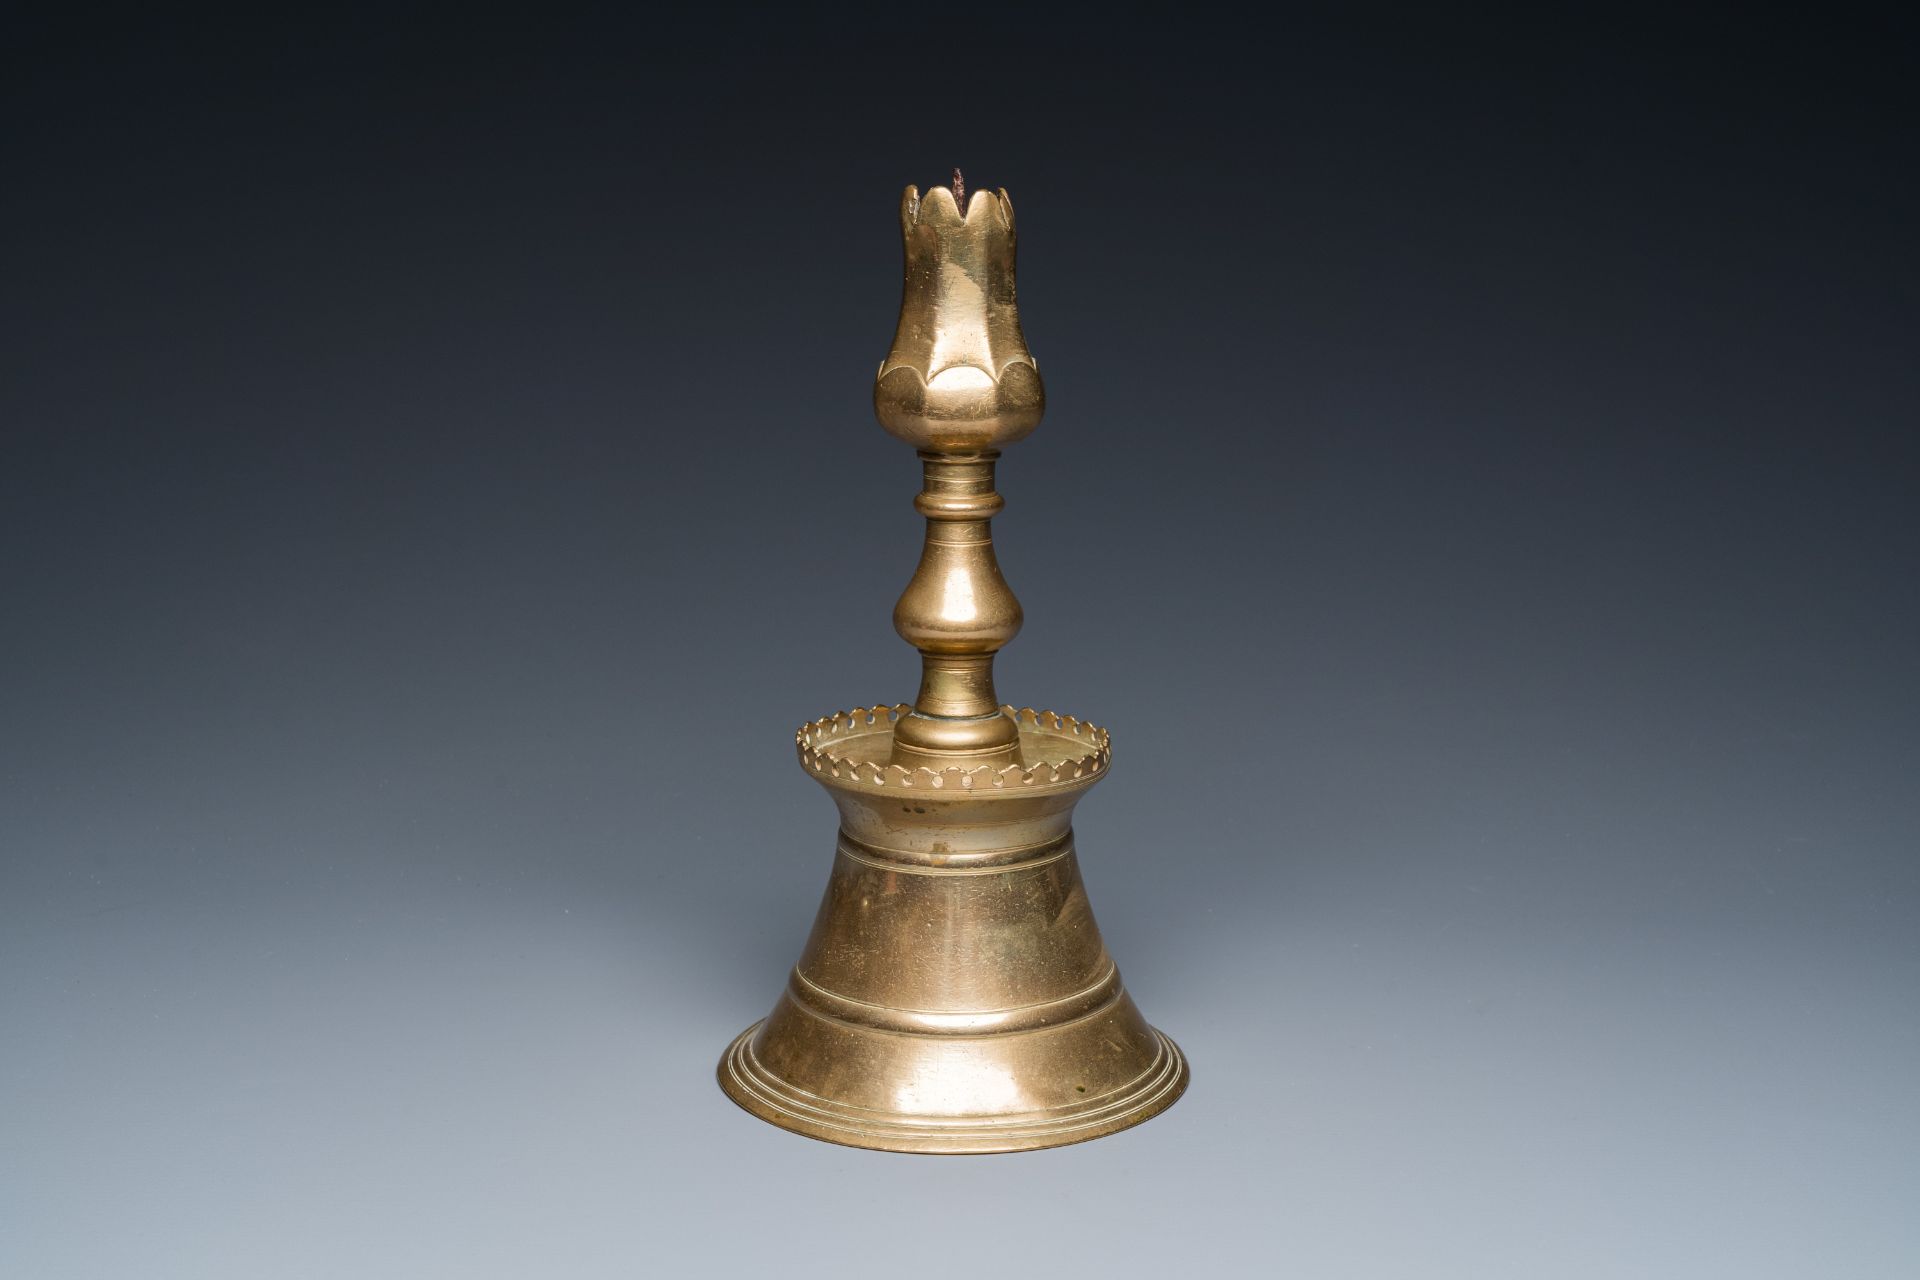 A Turkish bronze candlestick with tulip-shaped sconce, 18th C. - Image 7 of 7